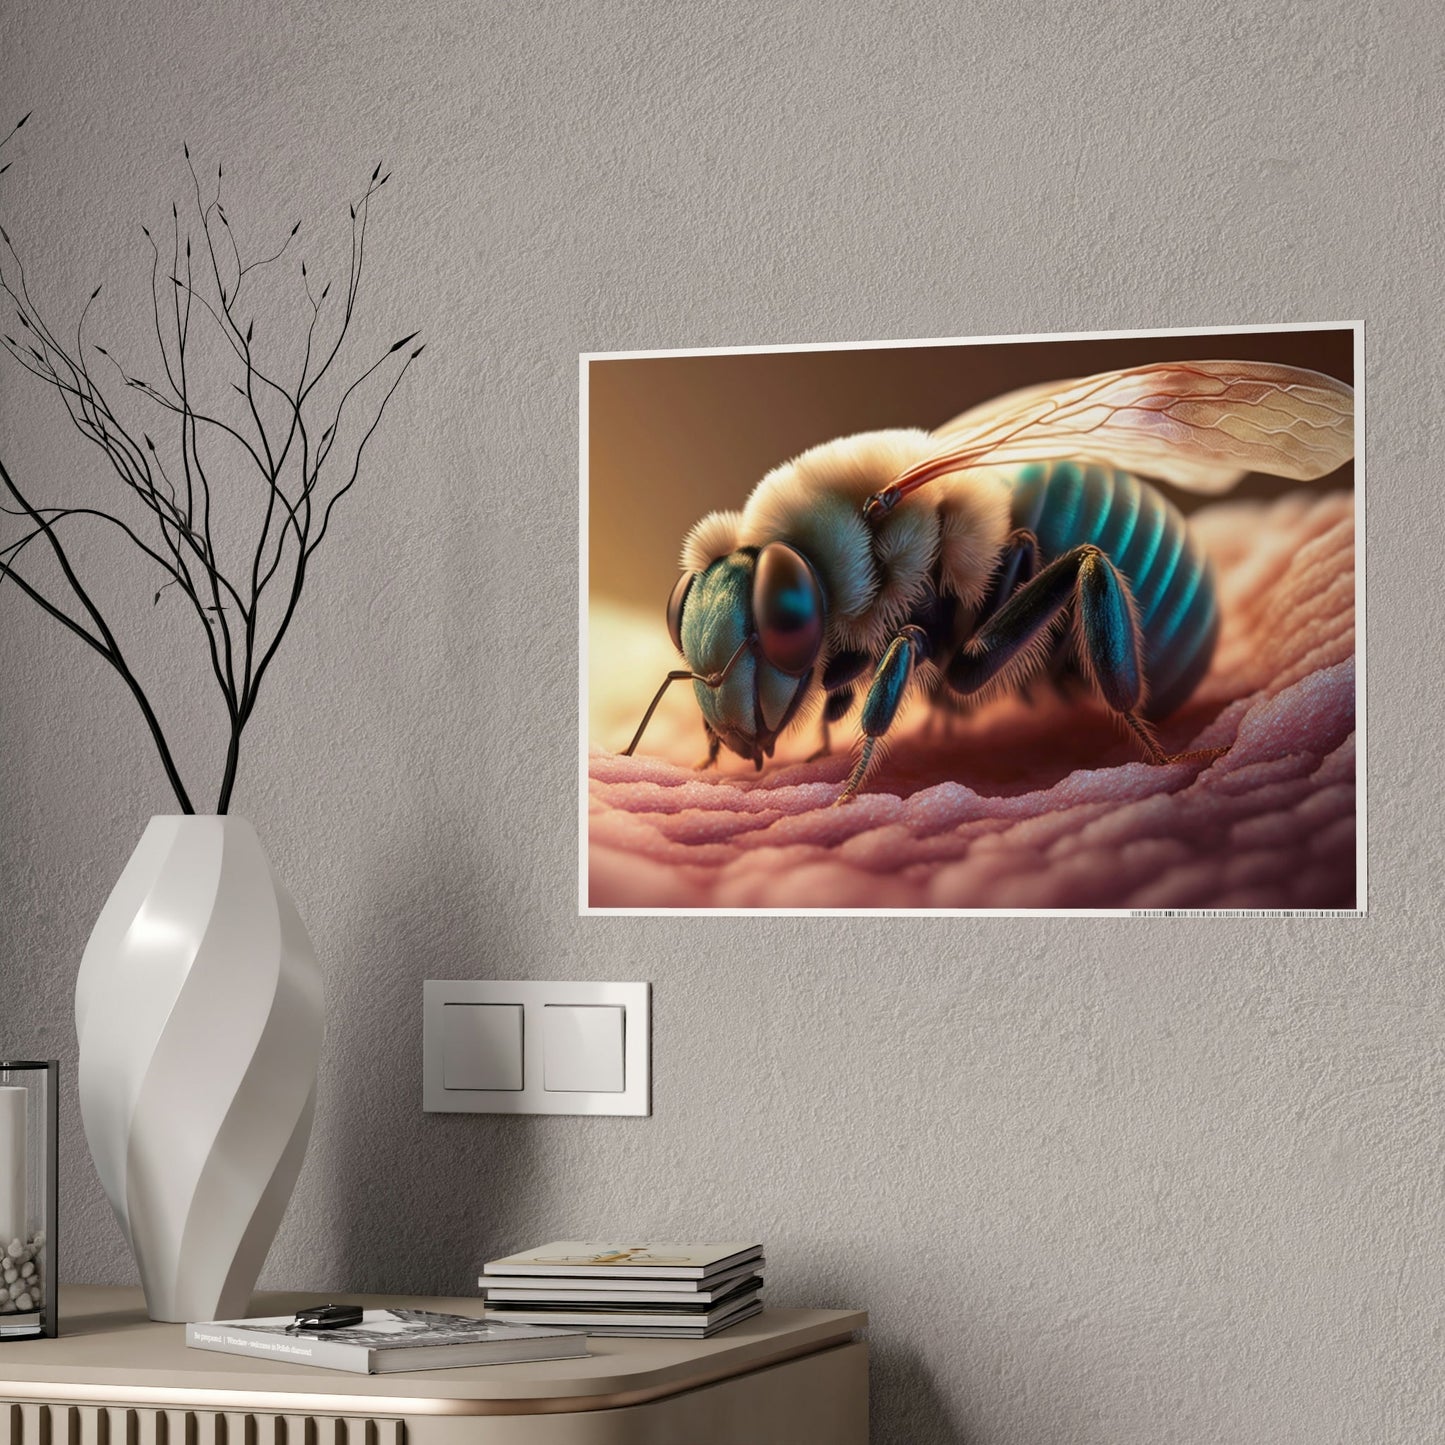 The Art of Pollination: A Print on Canvas & Poster of a Bee and a Flower in Harmony